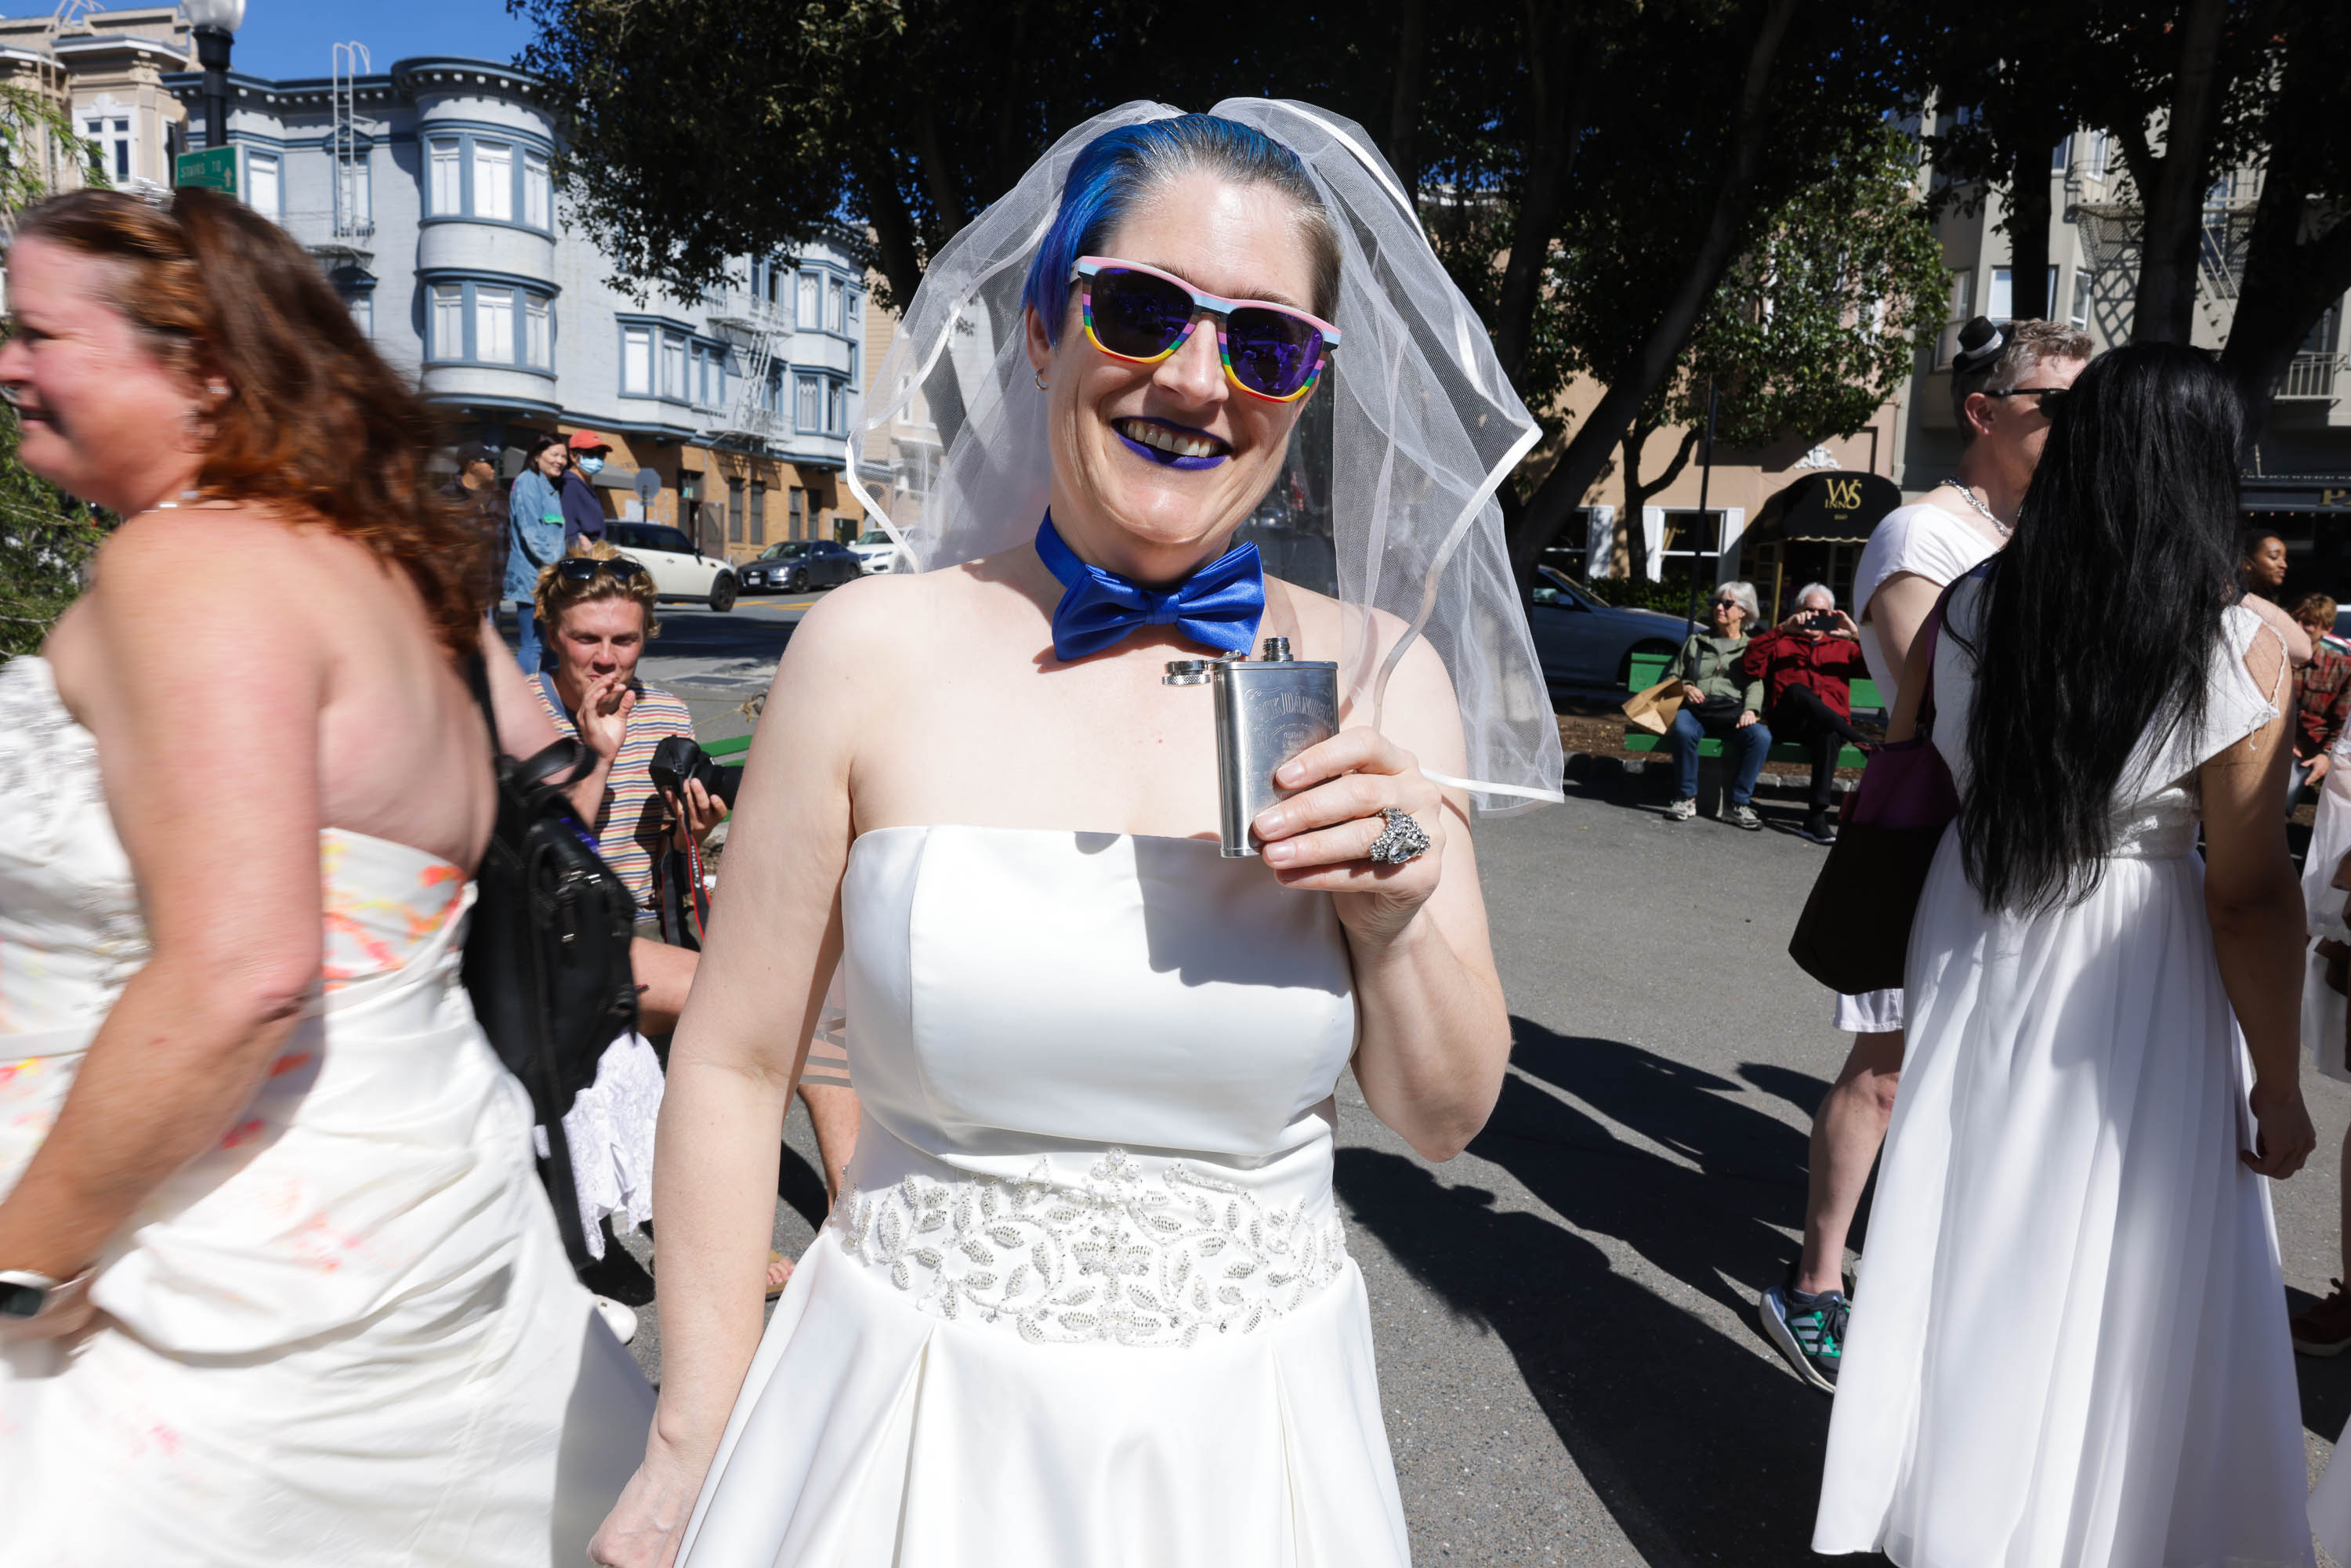 A smiling person in a white dress and veil with blue hair and bowtie holds a flask at a sunny outdoor event.